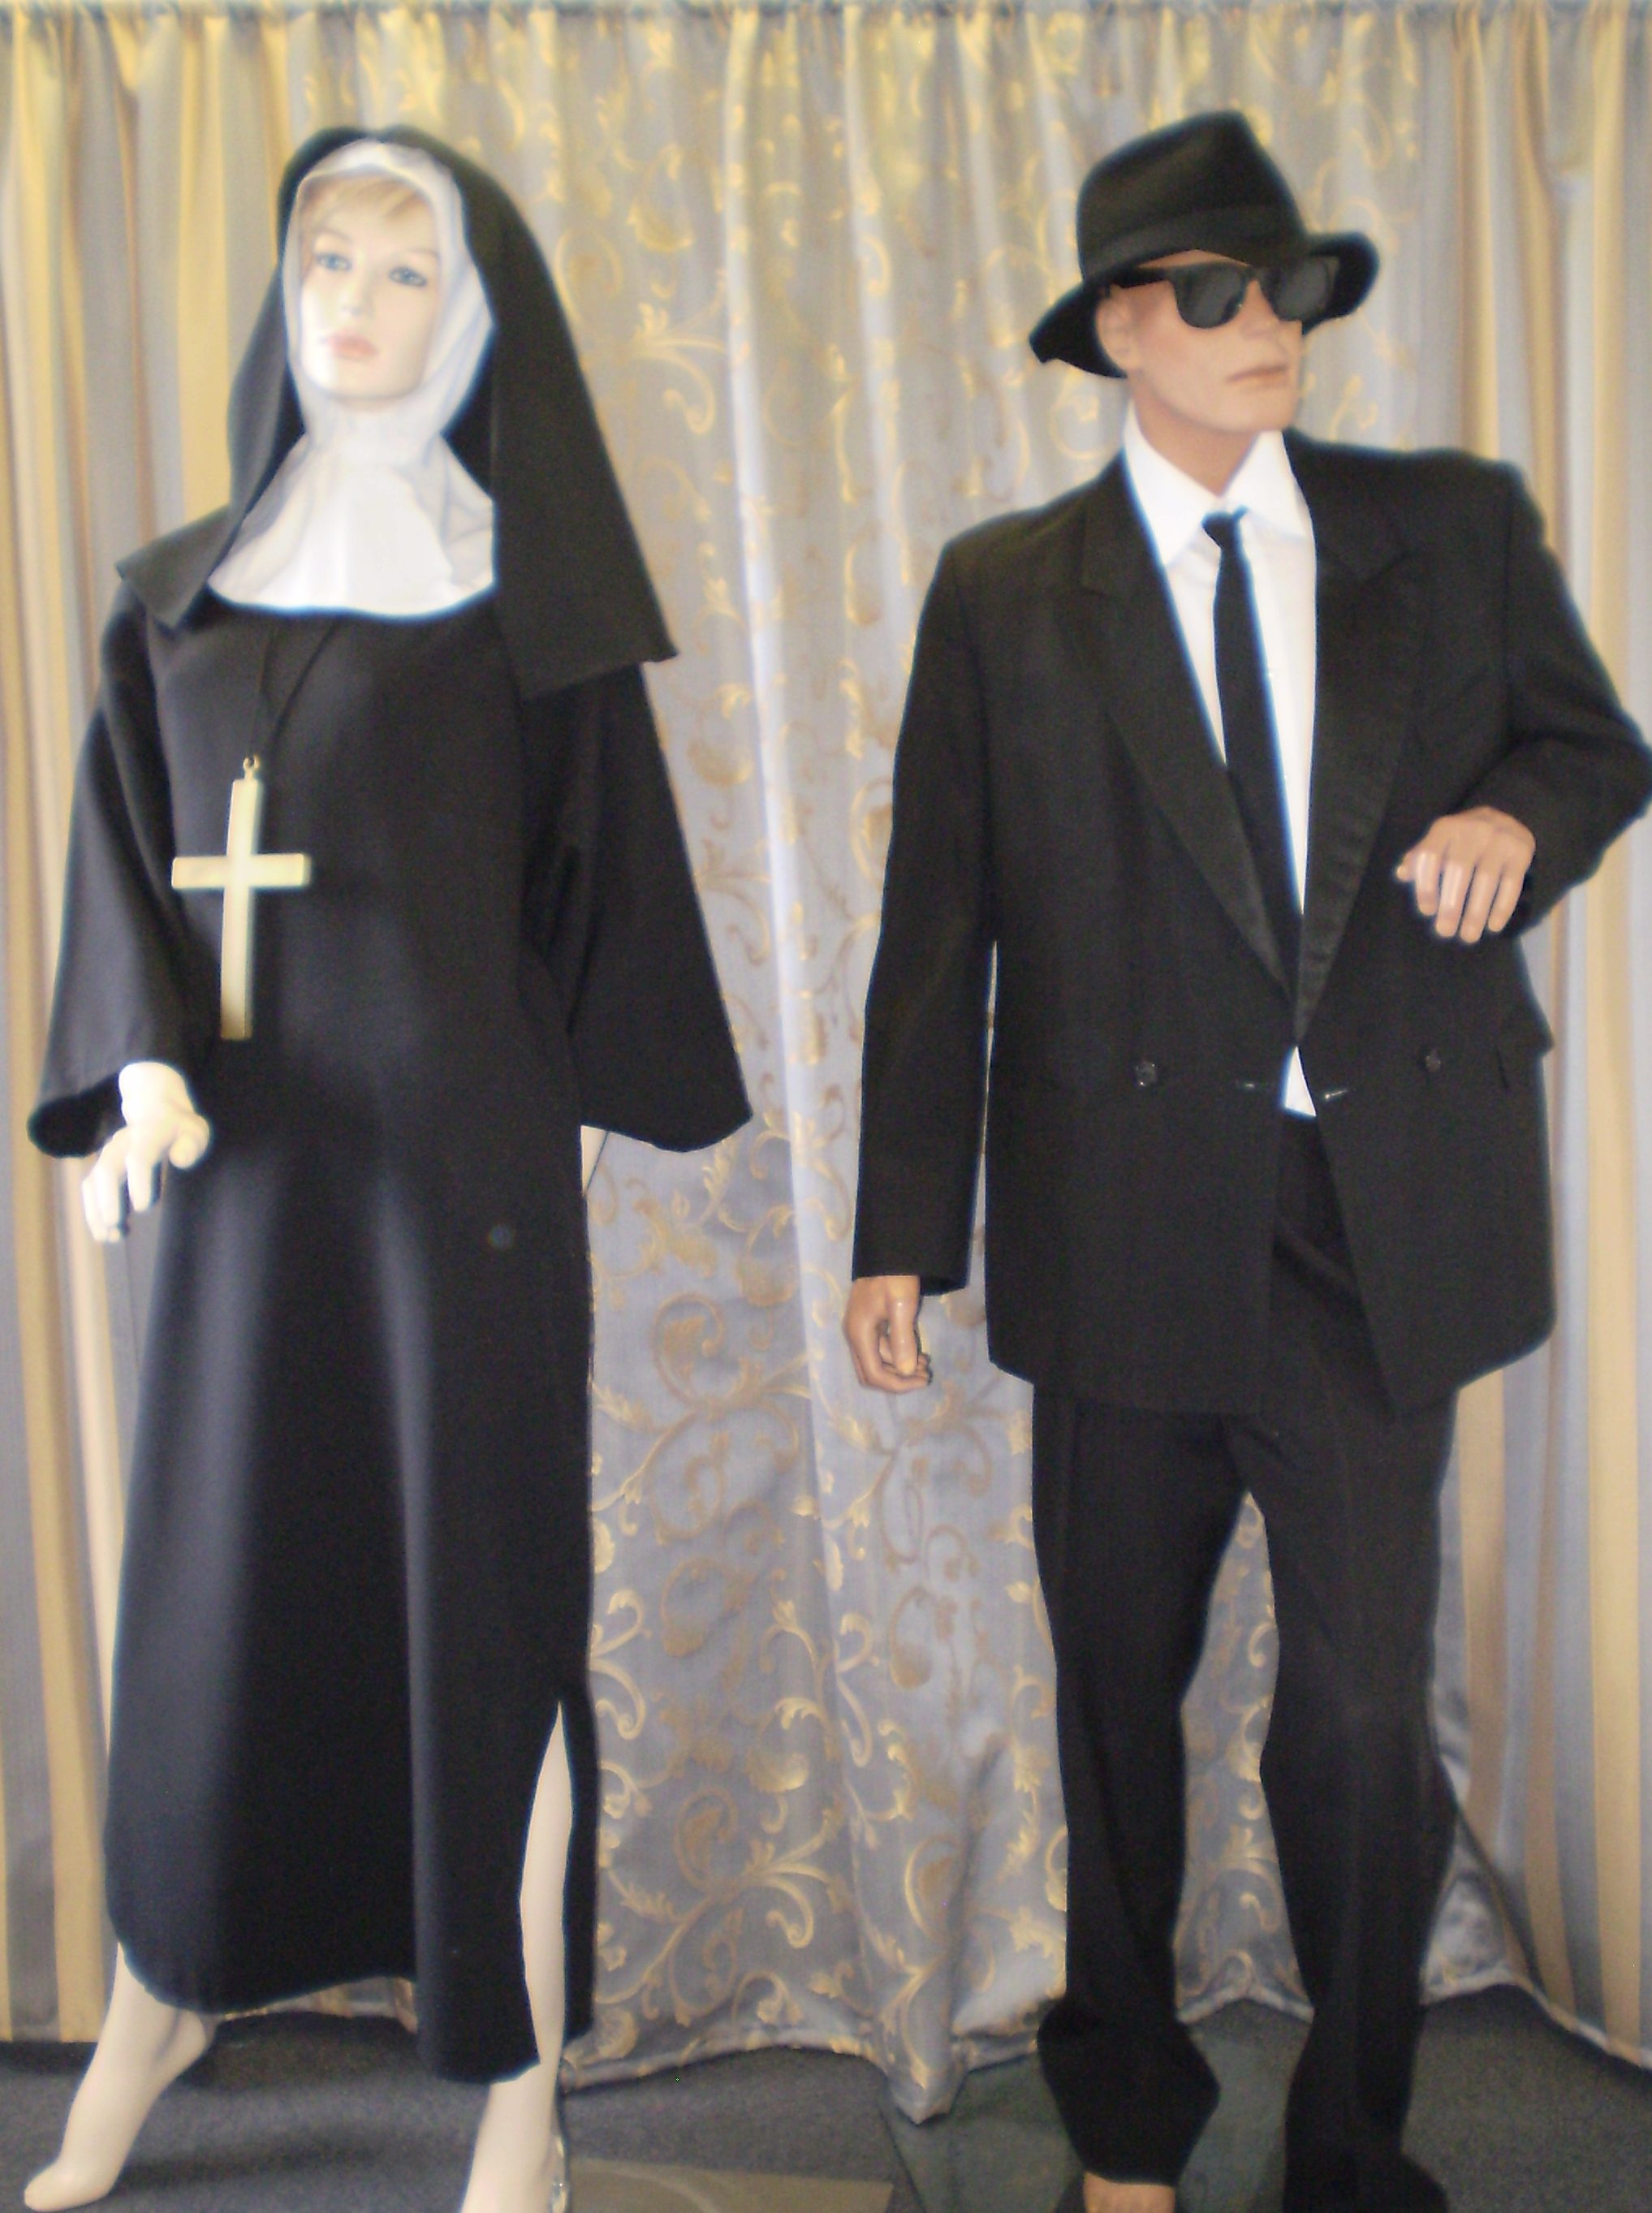 Blues Brothers costume ideas - Acting the Part - Visit a real shop